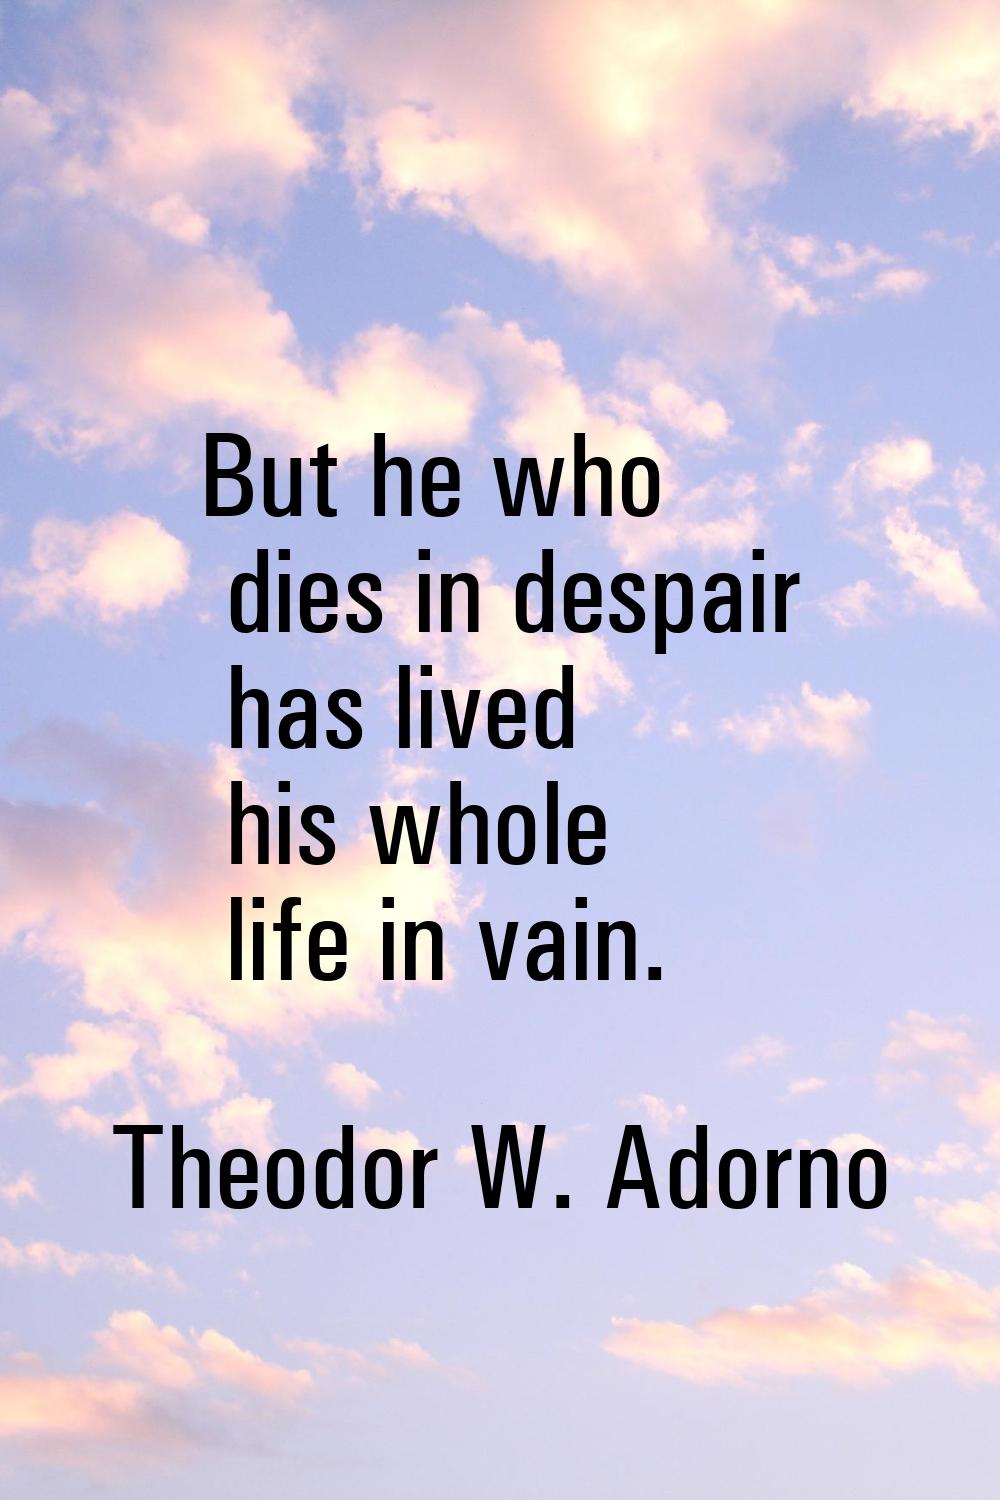 But he who dies in despair has lived his whole life in vain.